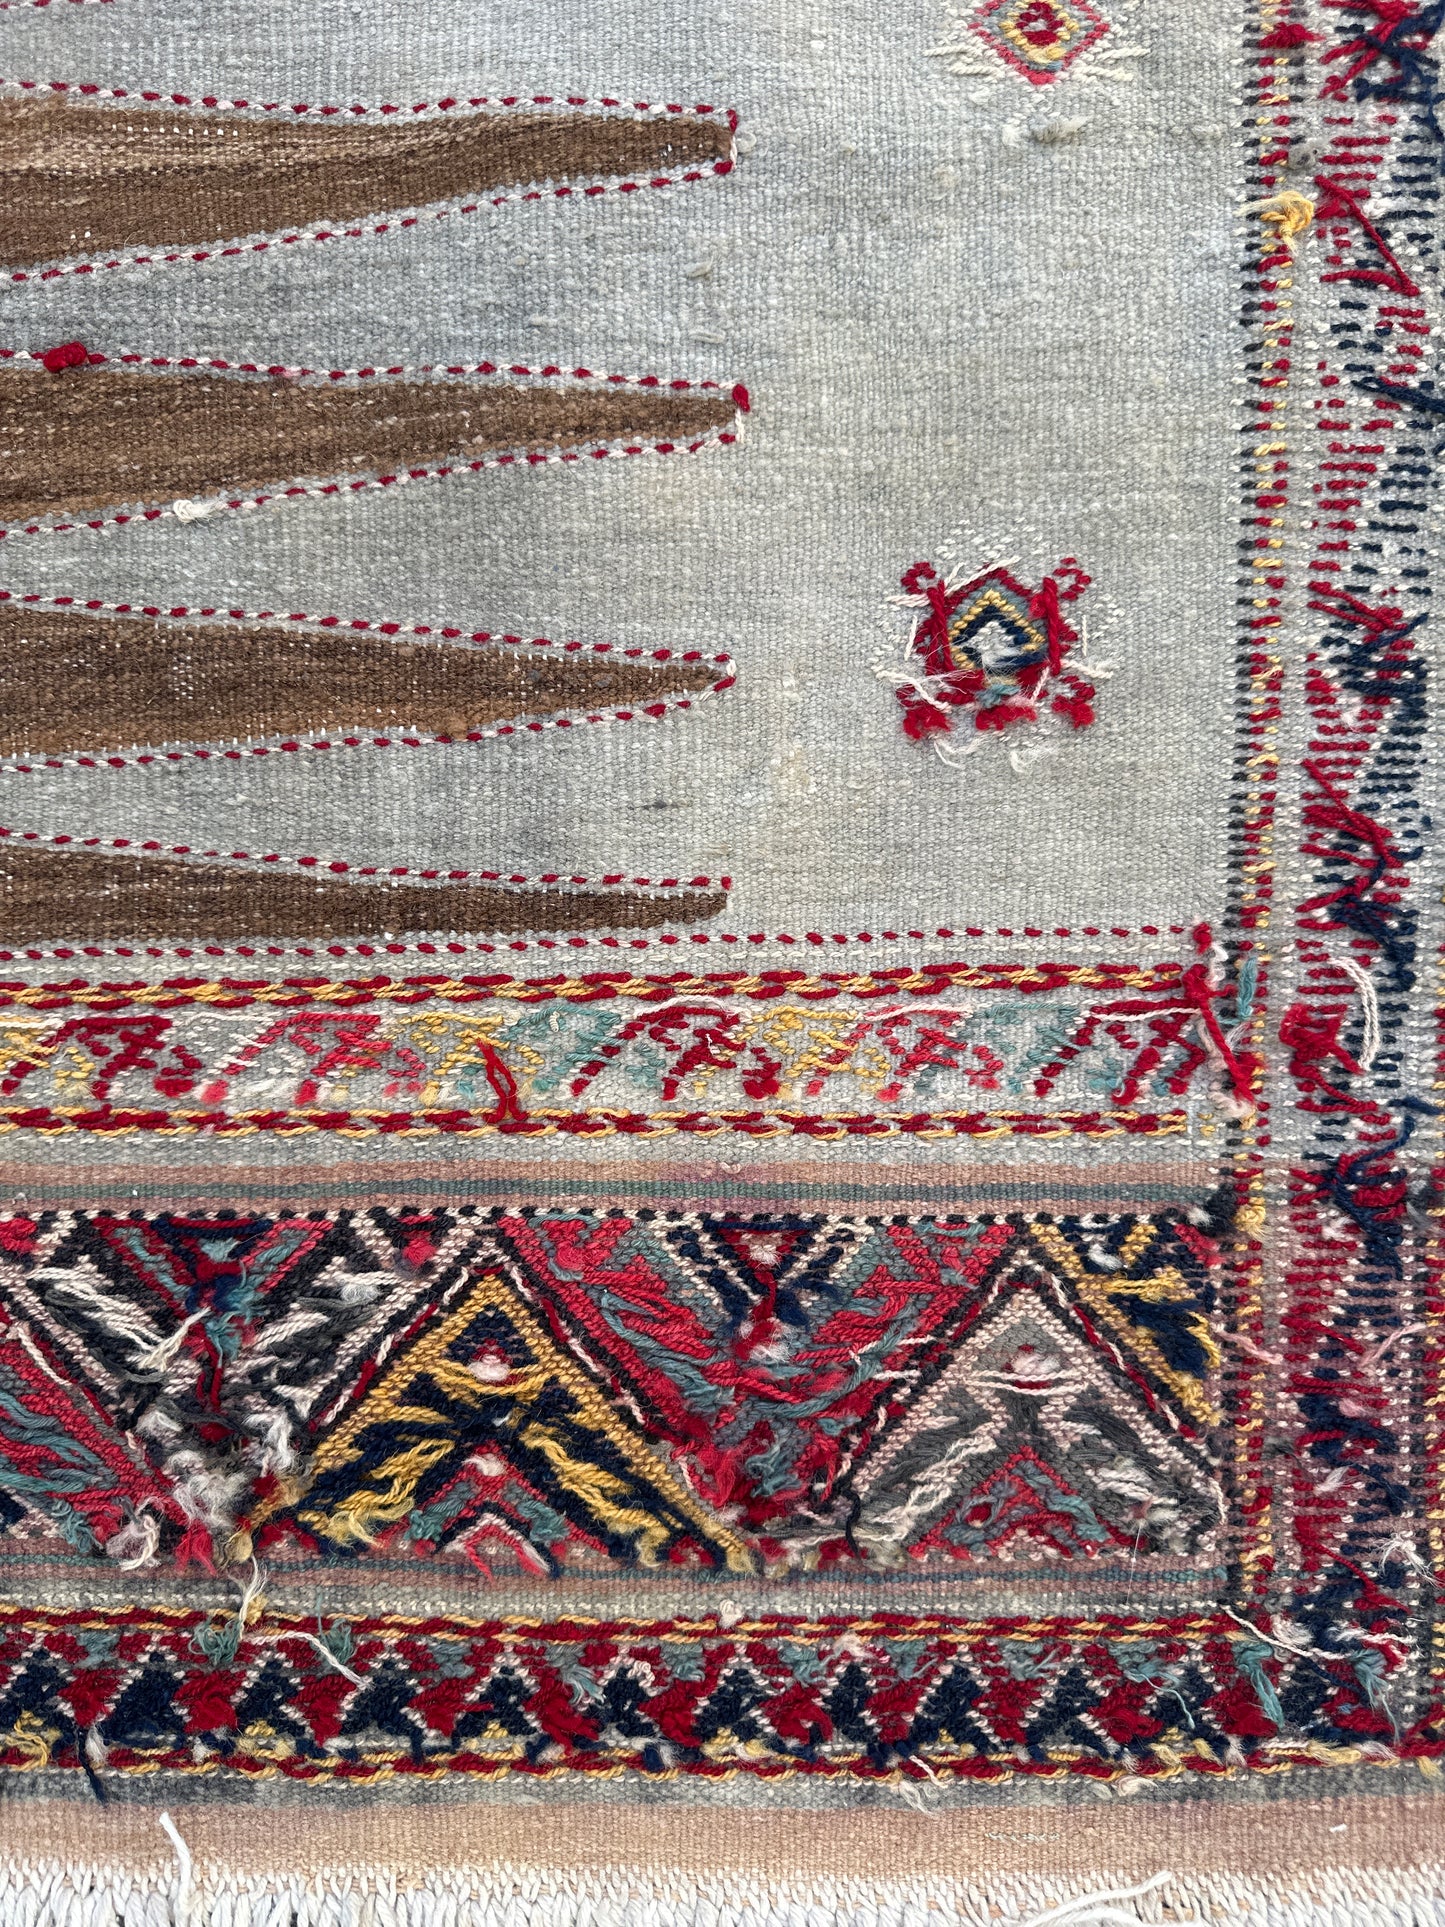 3'x7' Beautiful Vintage Antique Baluch Sofreh Small Runner